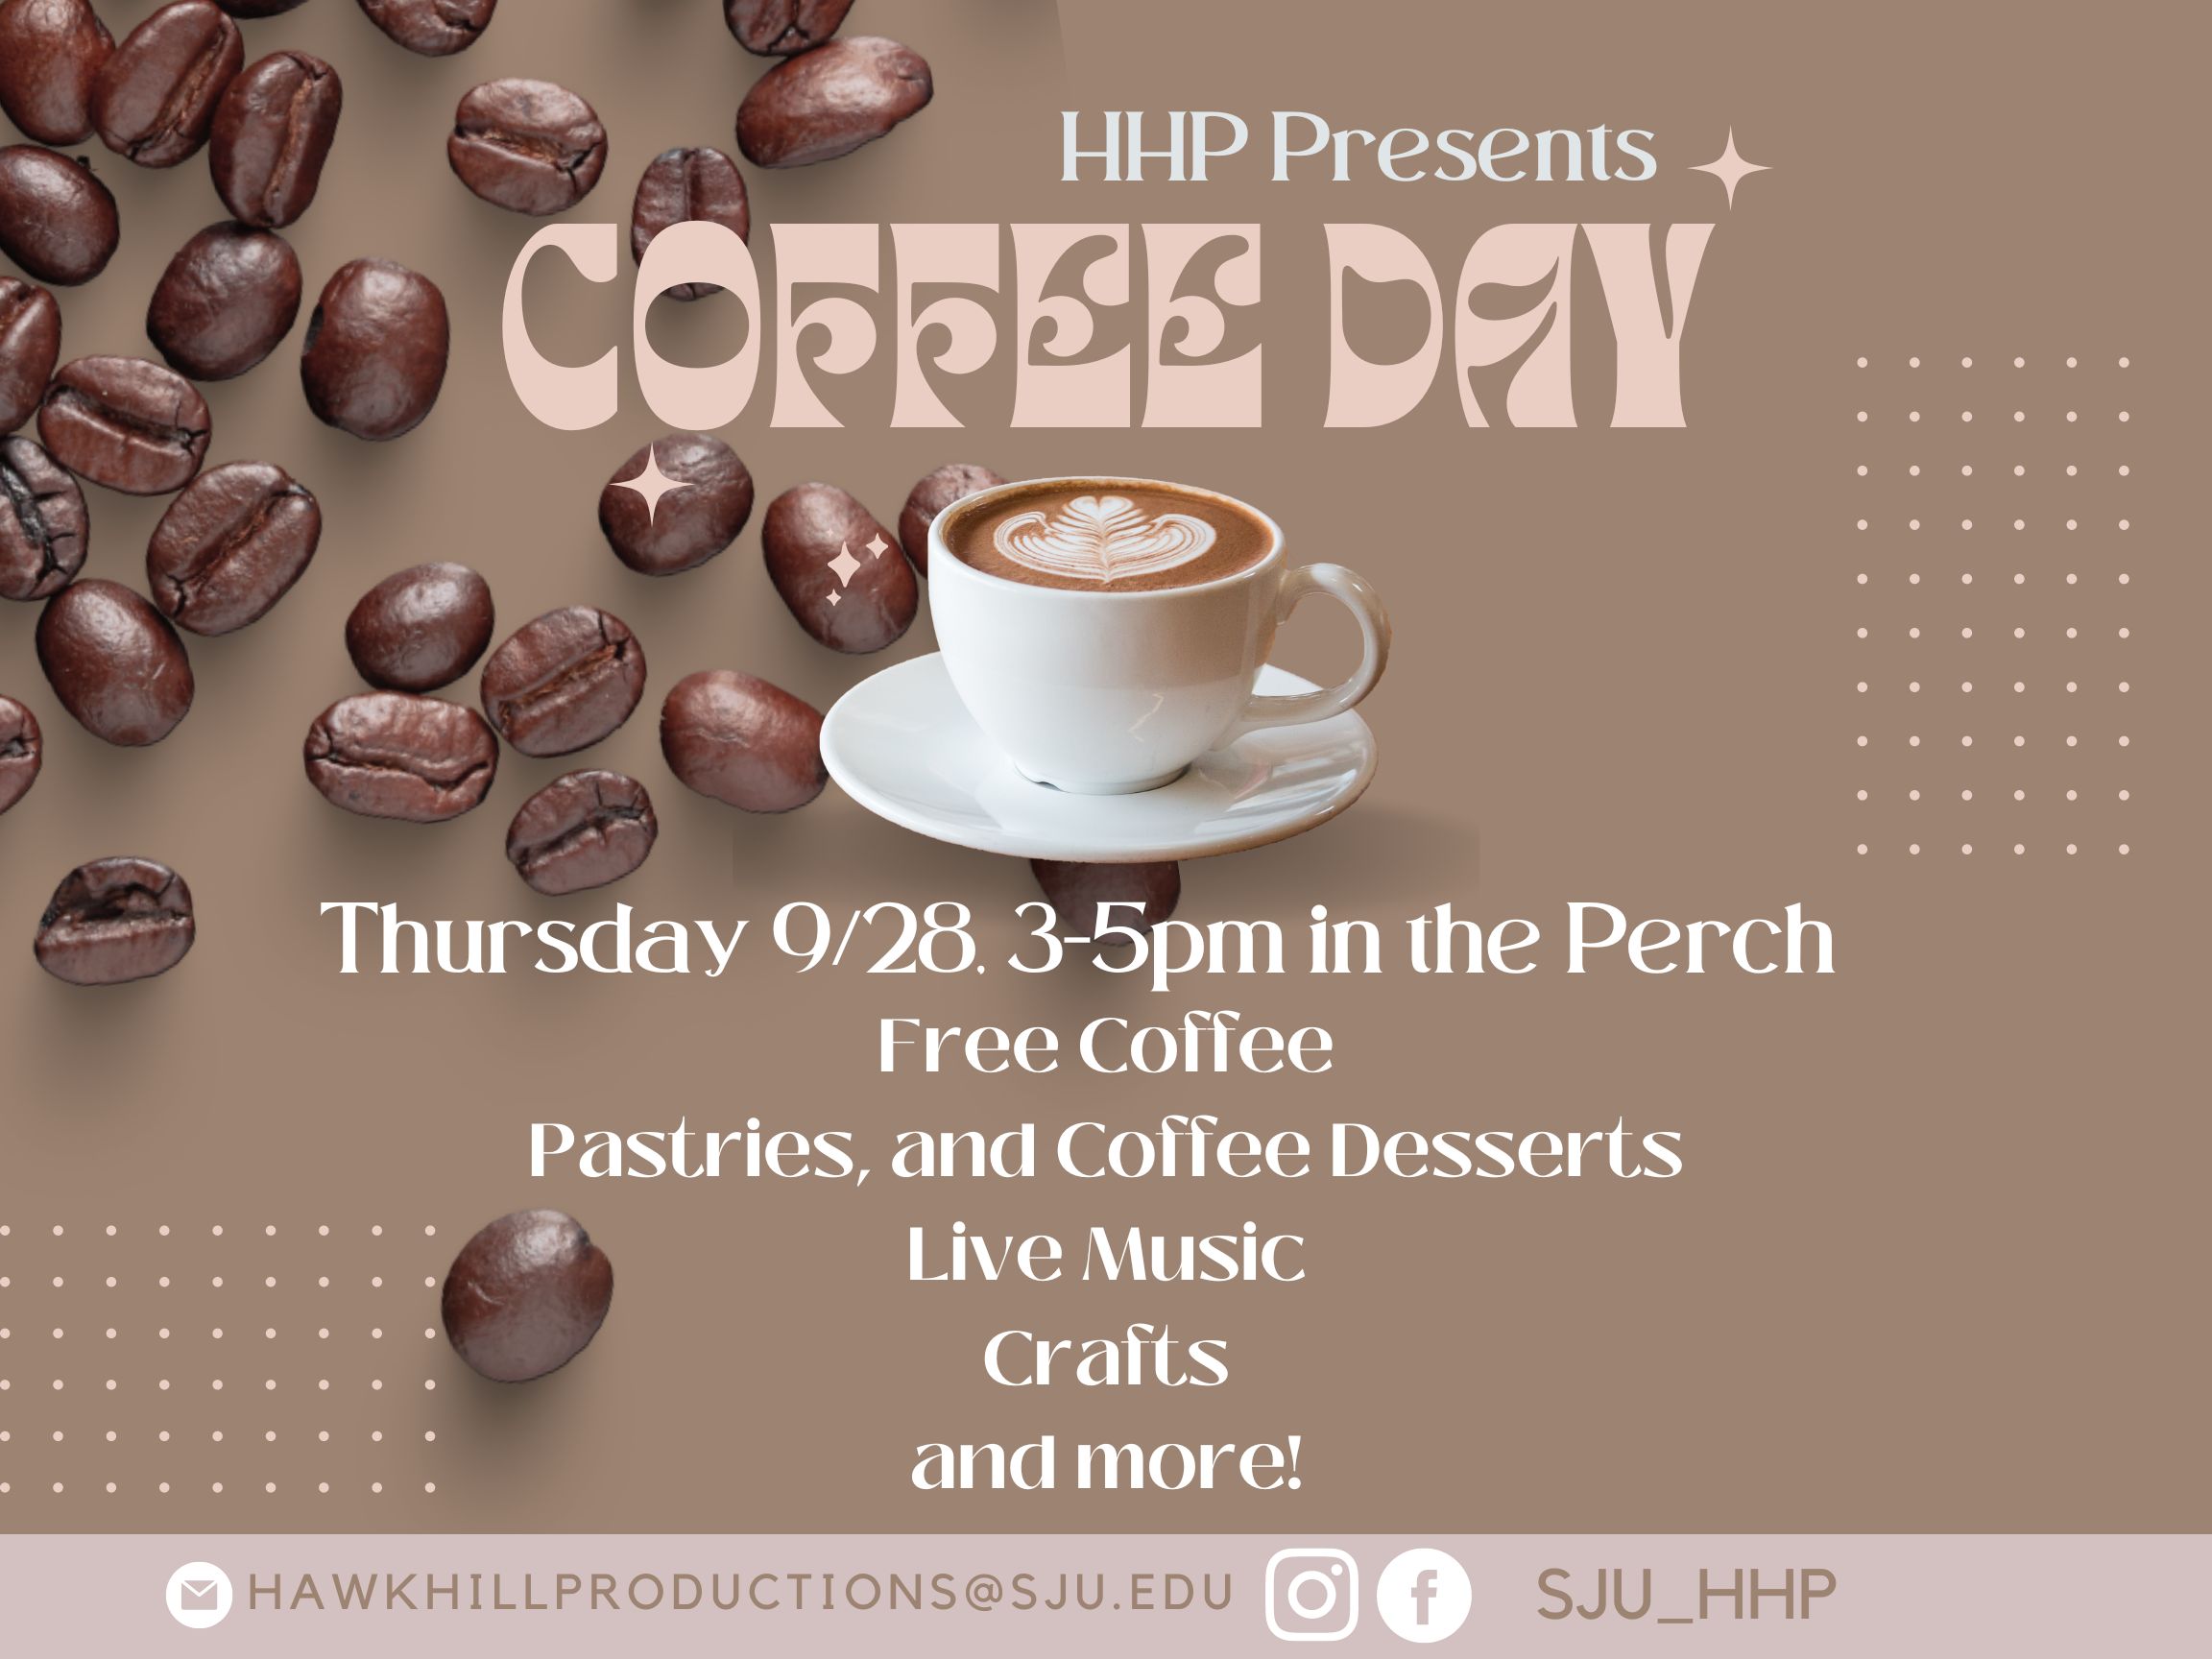 This is a flyer for a coffee day event with a brown background and coffee beans coming down from the upper left hand corner. In the center of the page there is a small white cappucino mug with coffee inside.